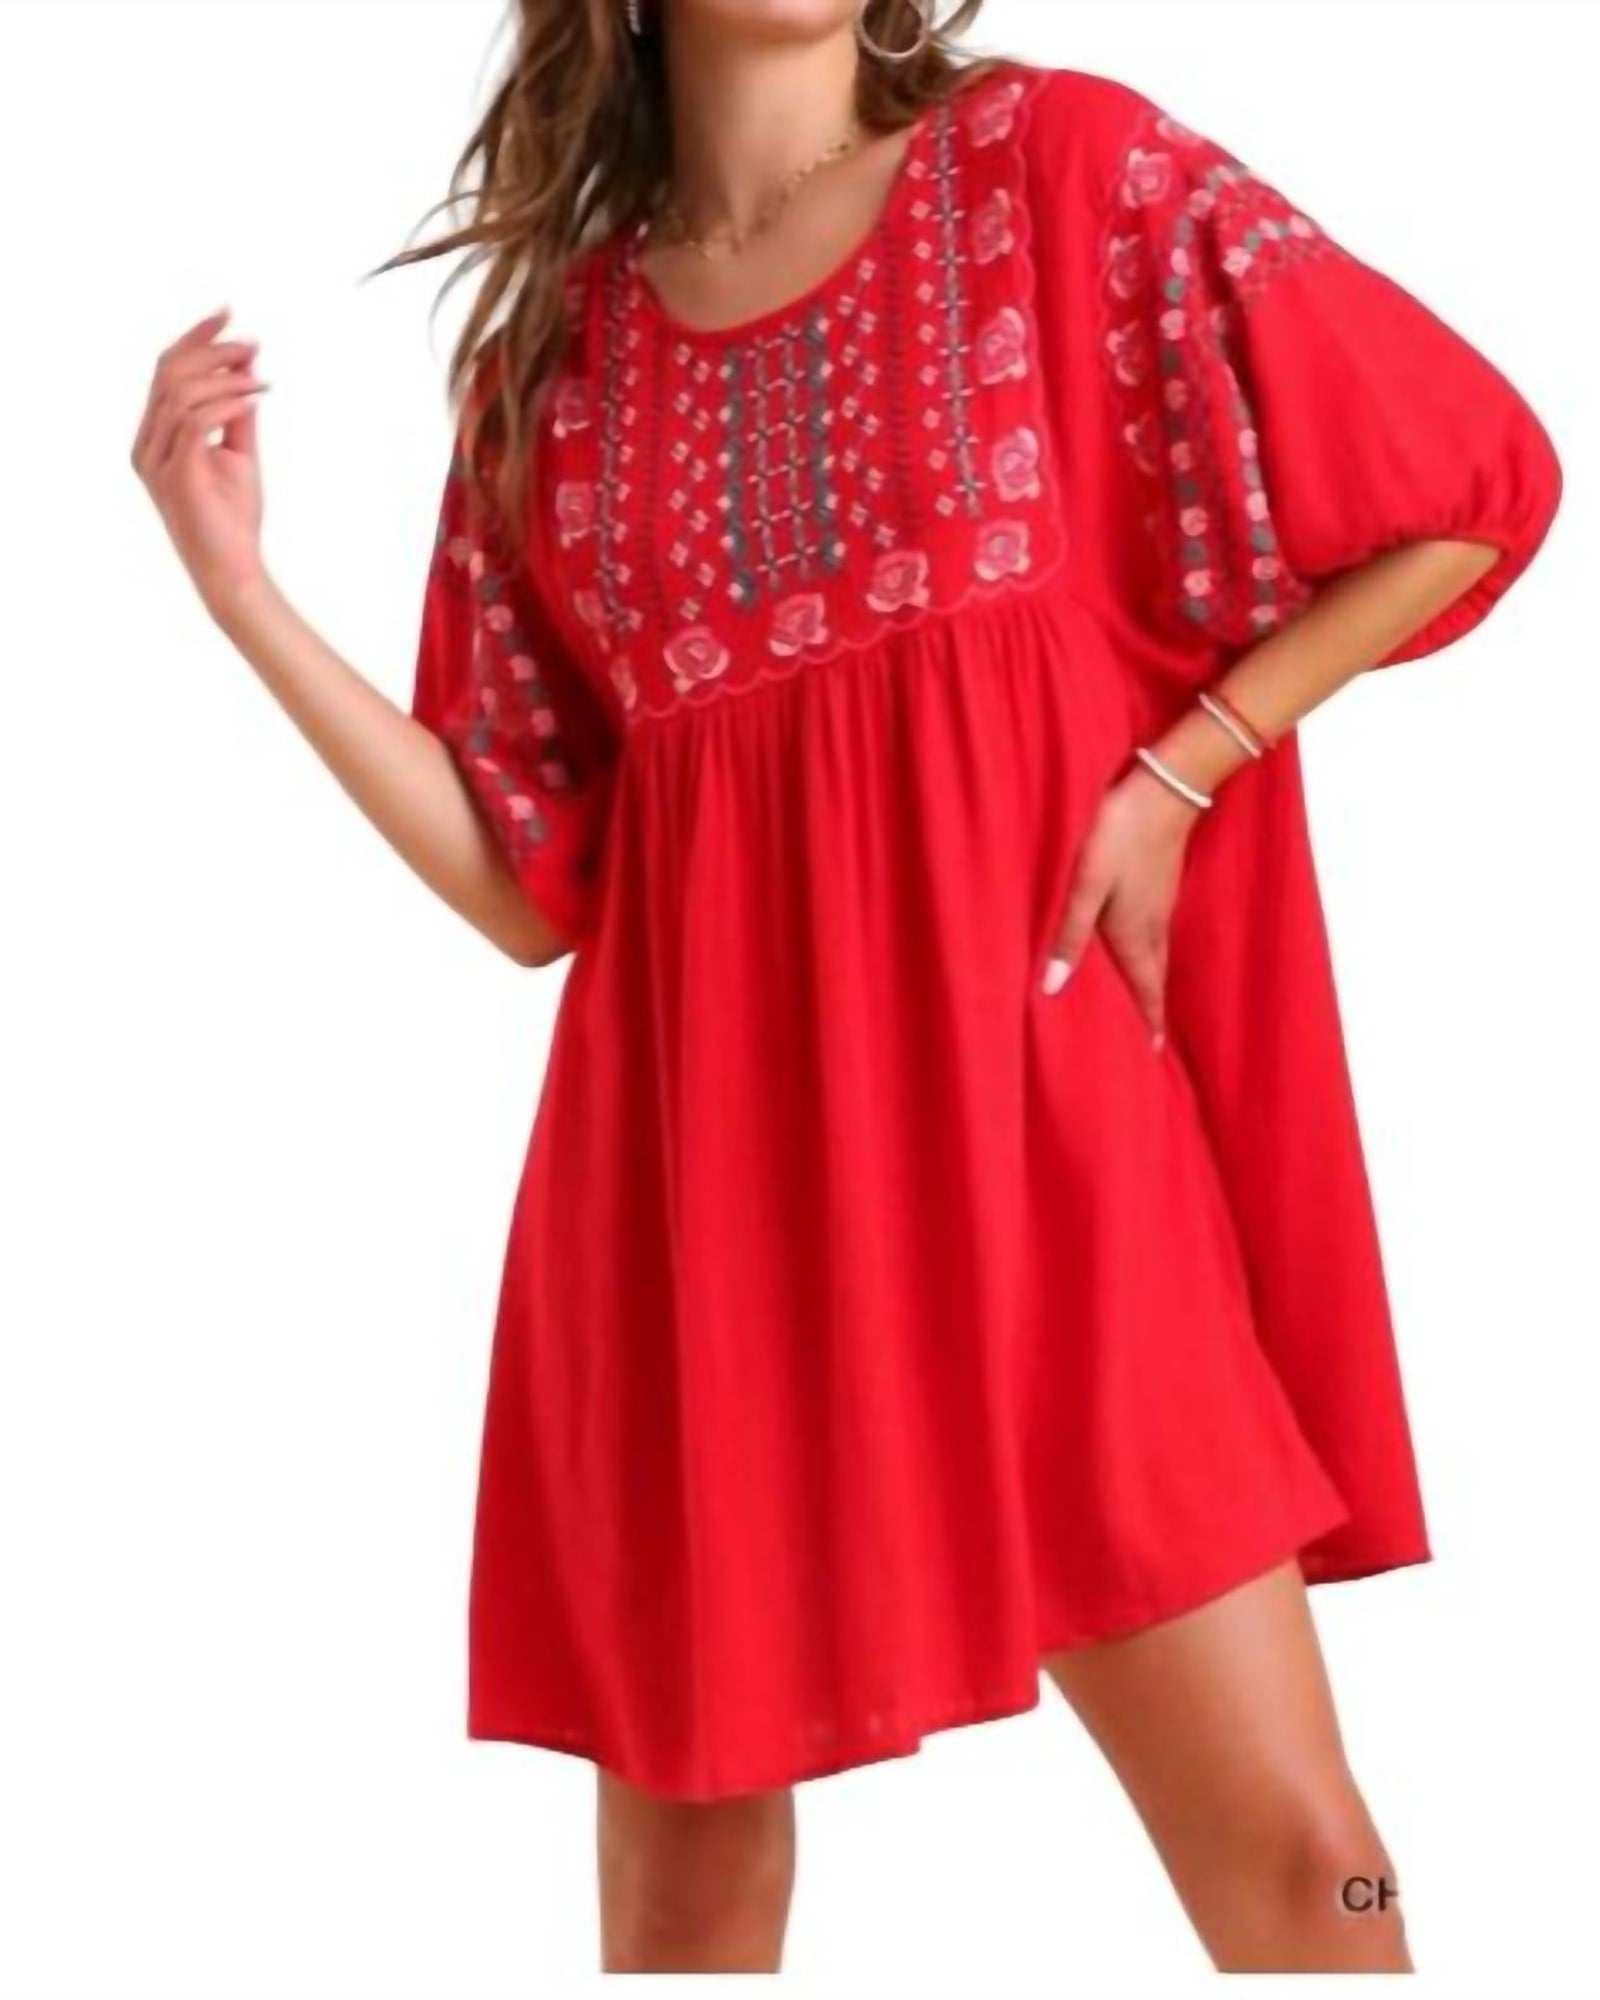 Floral Embroidered Dress in Cherry Red | Cherry Red